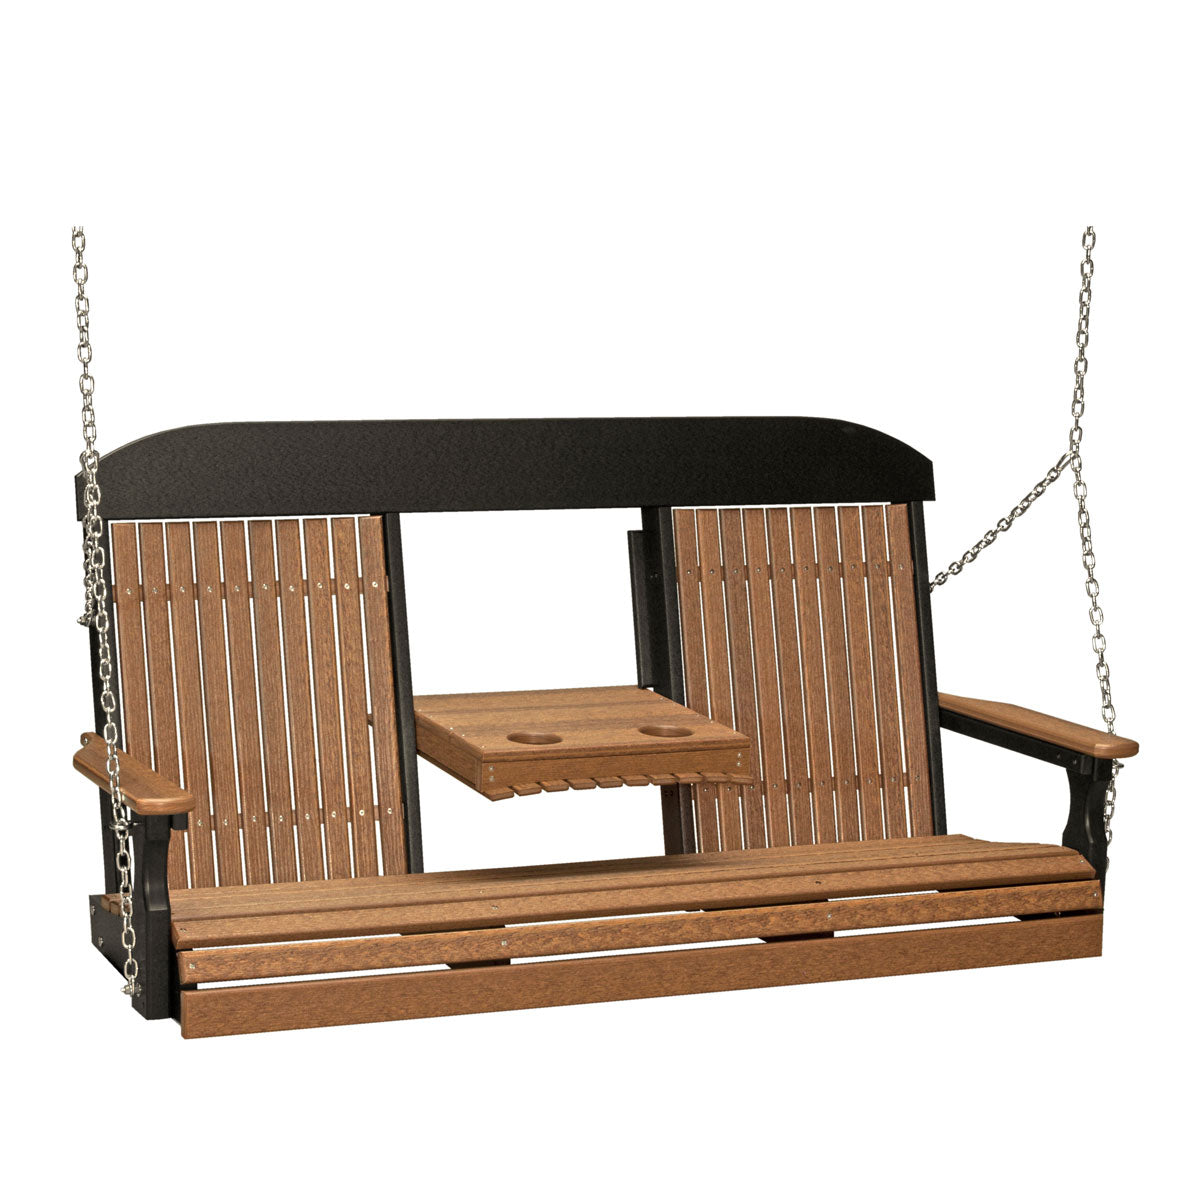 LuxCraft Classic Highback Console 5 Foot Poly Porch Swing